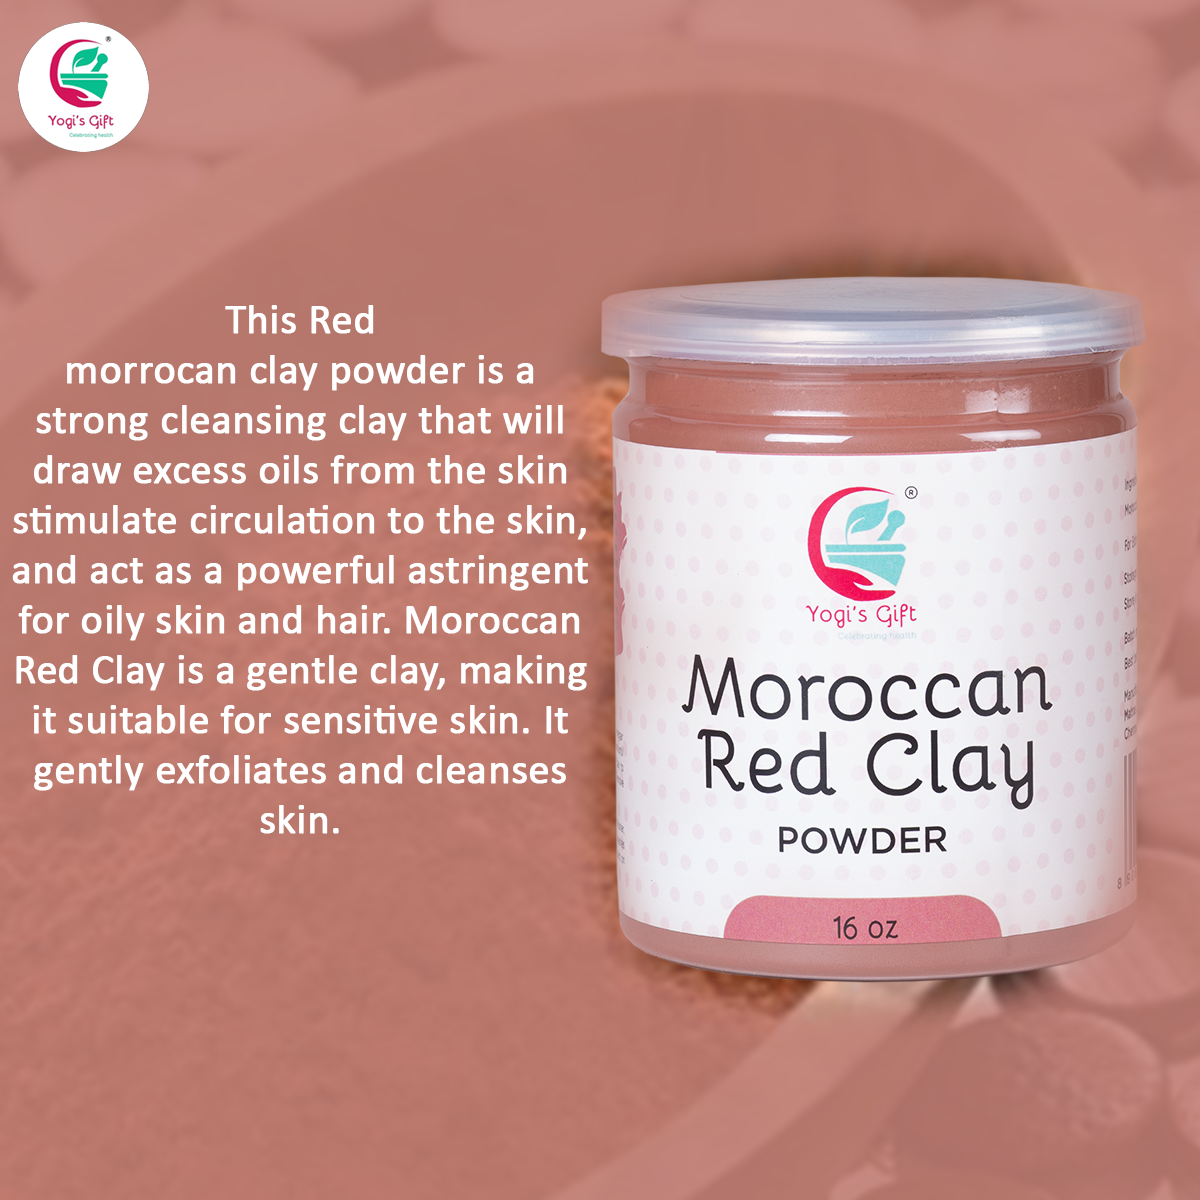 Moroccan Red Clay Powder | 16 Oz | Raw Clay Facial Mask | Deeply Cleanses Pores & Purifies the Skin | Yogi's Gift®